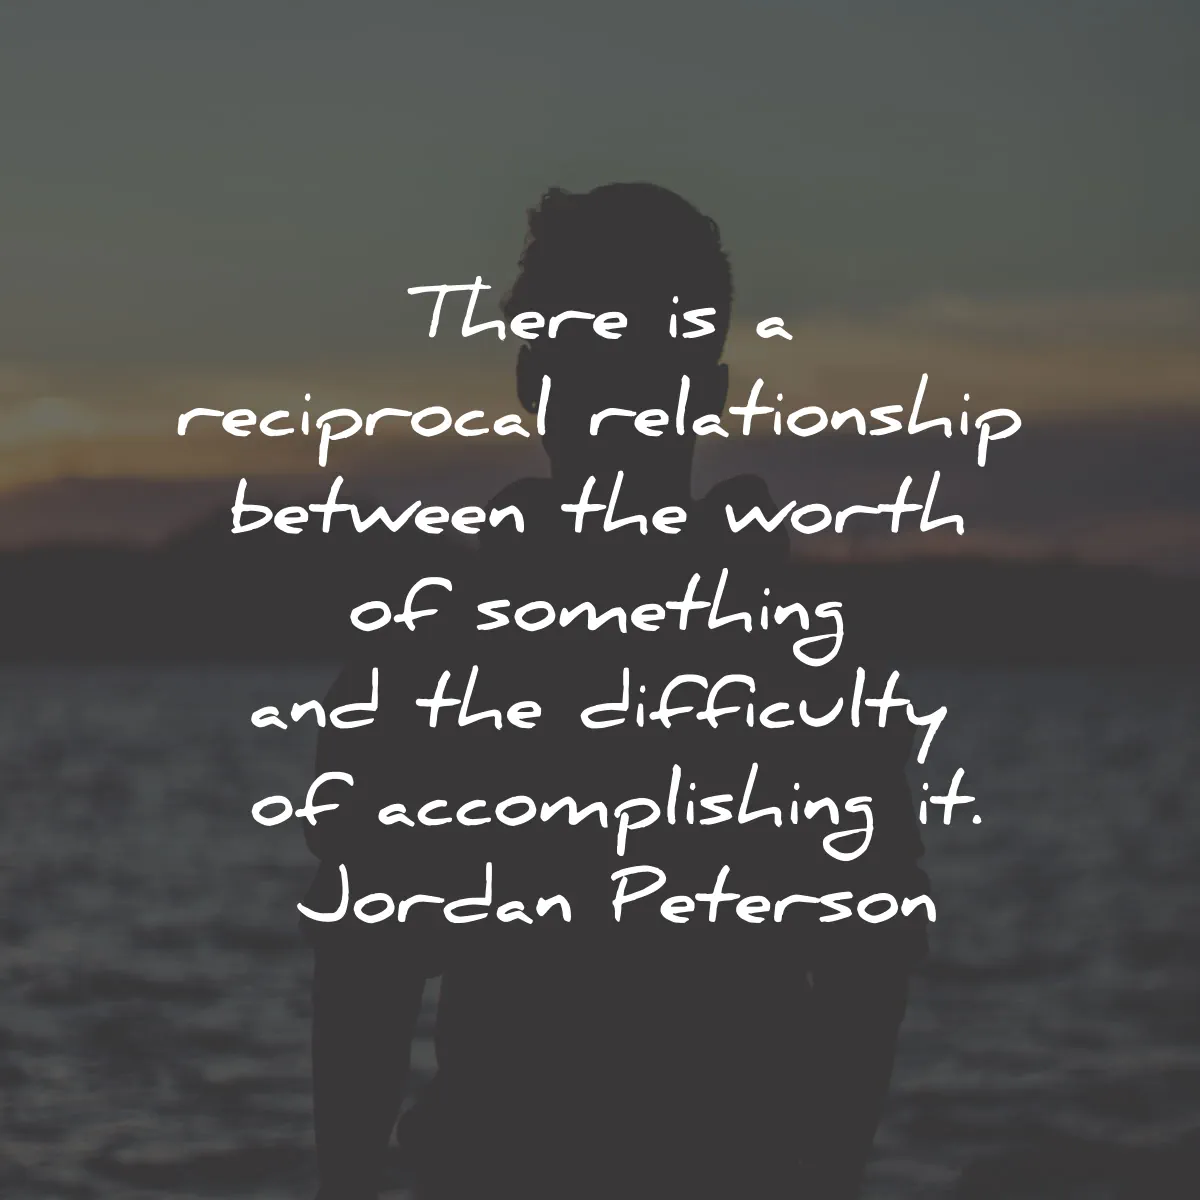 beyond order quotes summary jordan peterson reciprocal relationship worth difficulty wisdom